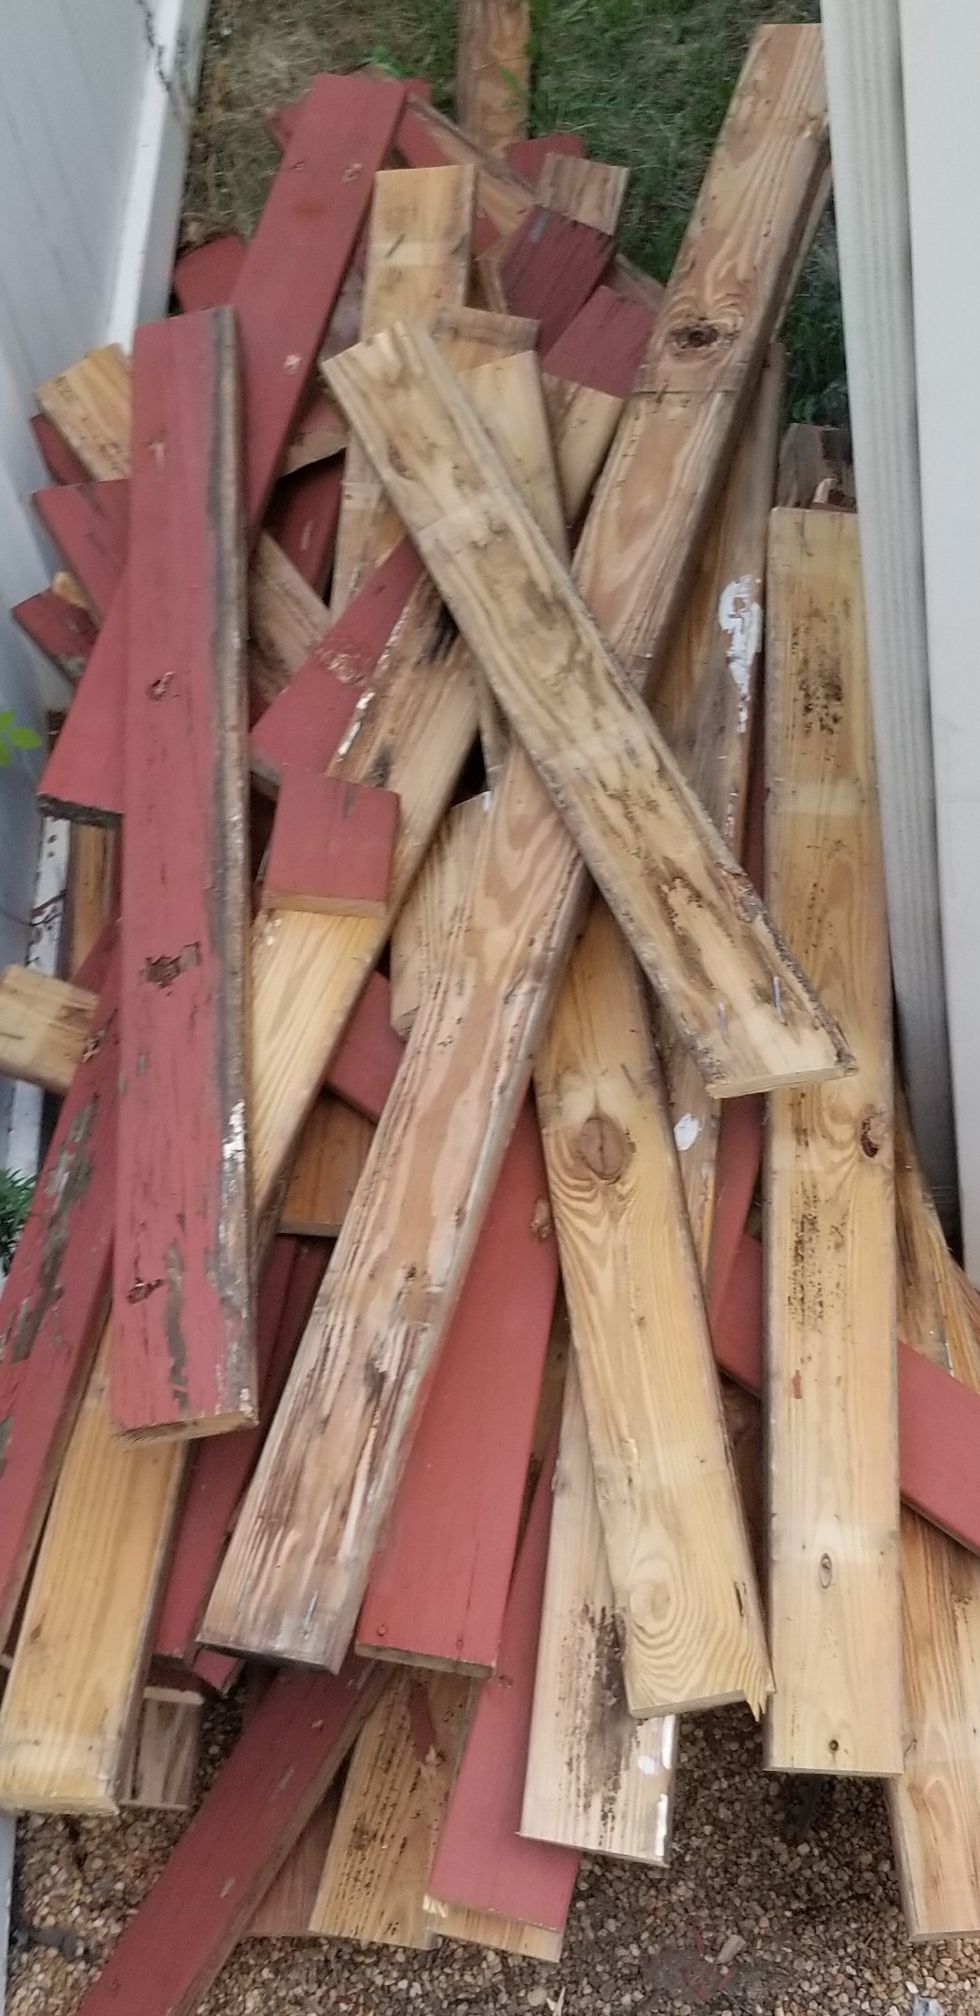 FREE scrap wood. Previously a deck so there are nails in the boards. You haul. First come